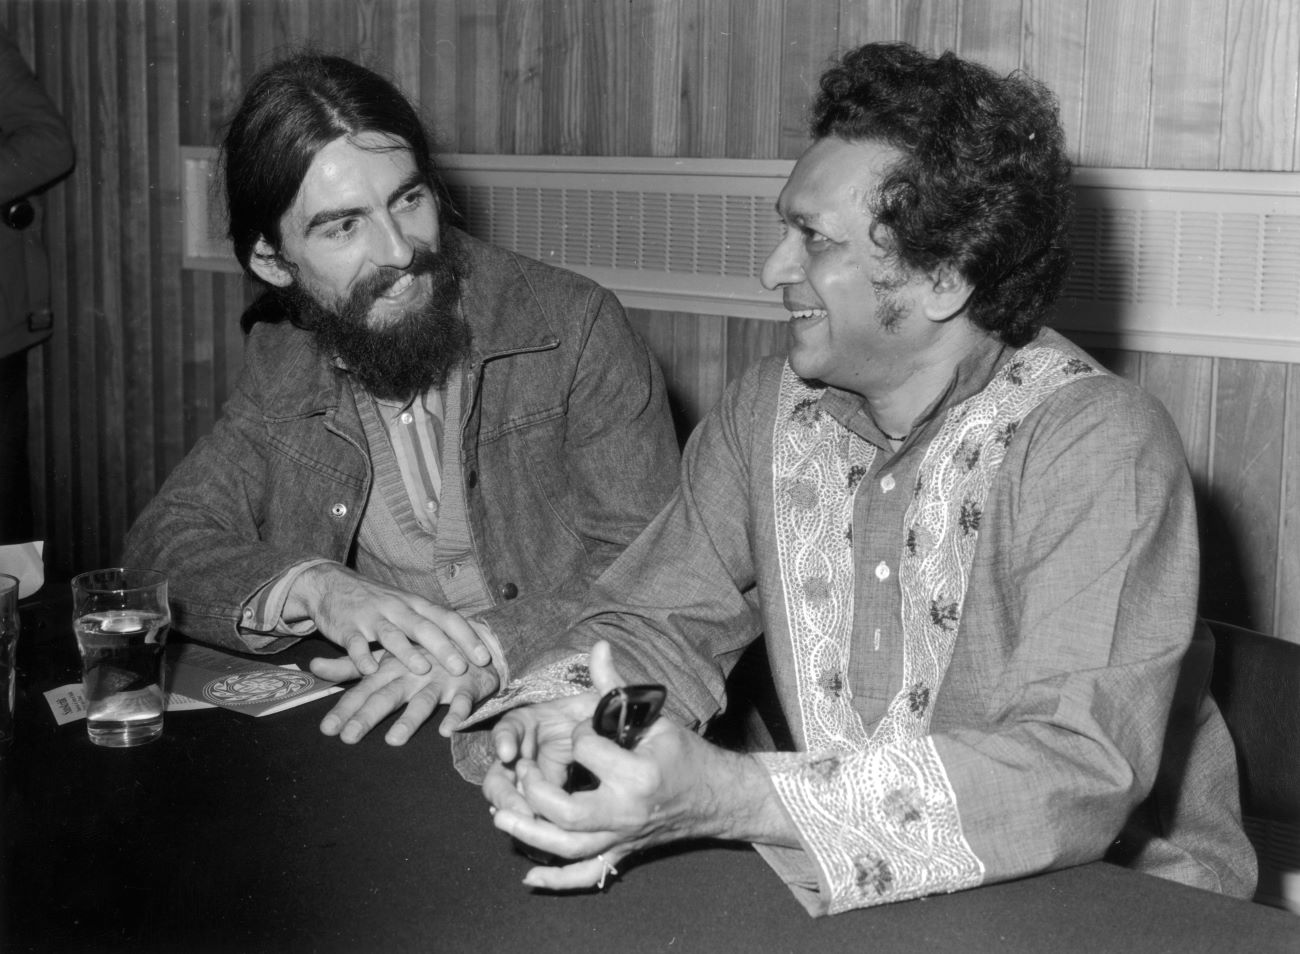 A black and white picture of George Harrison and Ravi Shankar sitting at a table together.